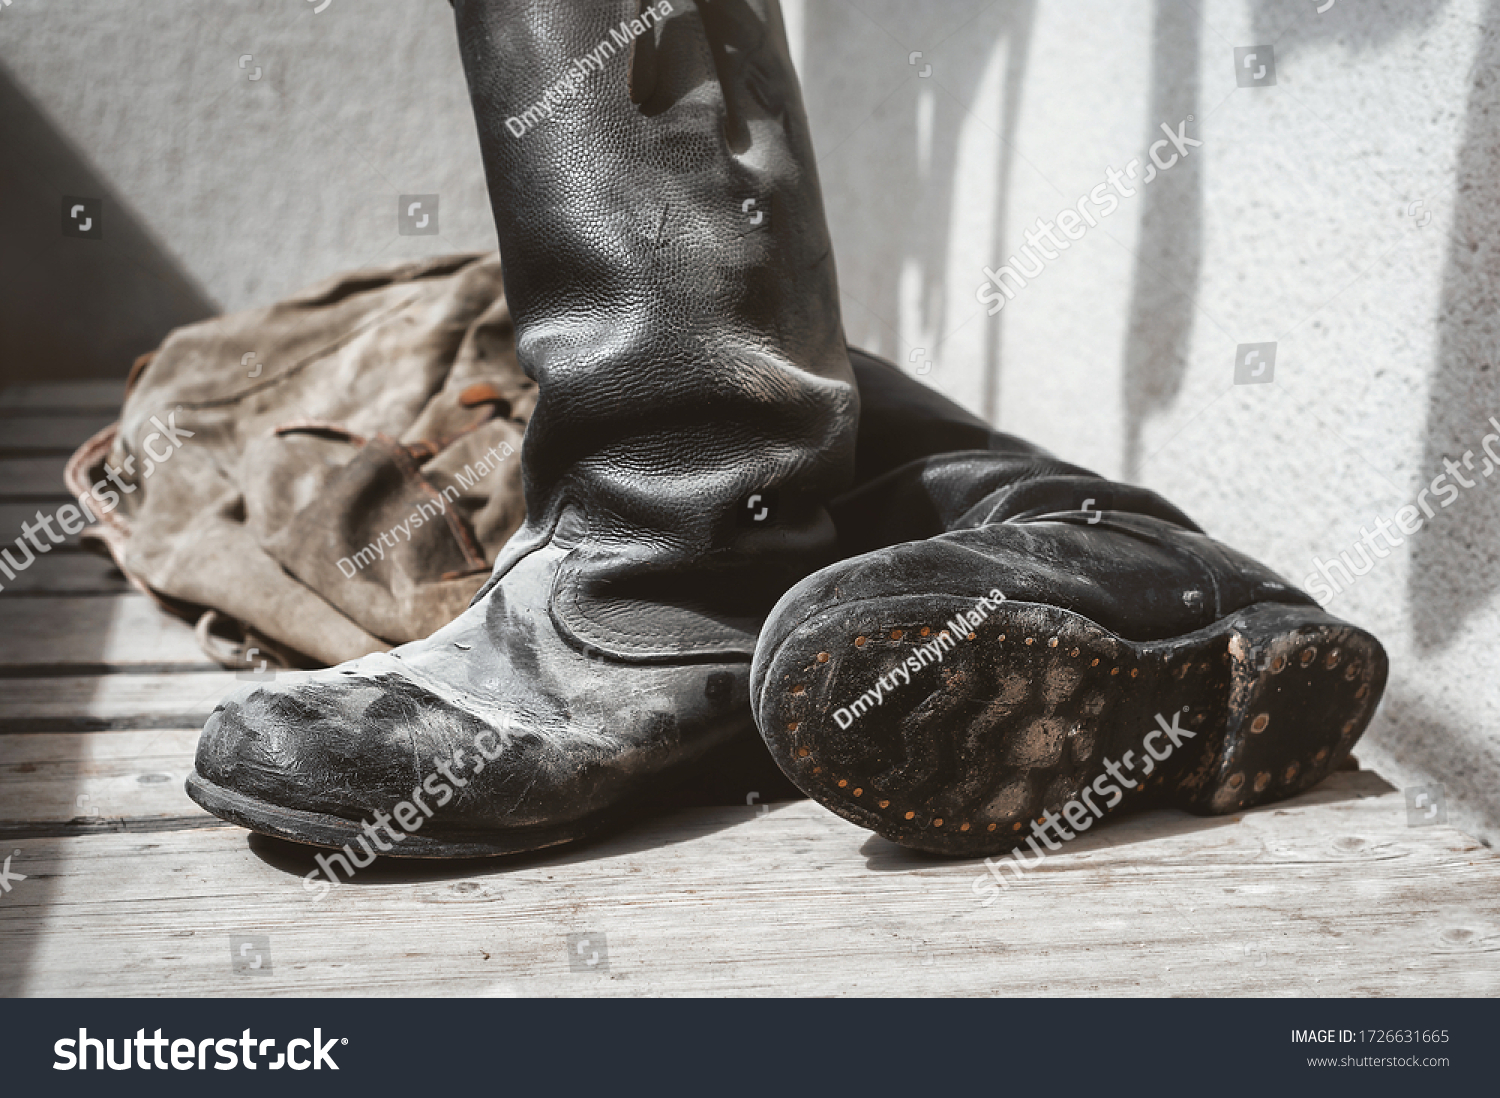 22 Vintage russian high boots Images, Stock Photos & Vectors | Shutterstock